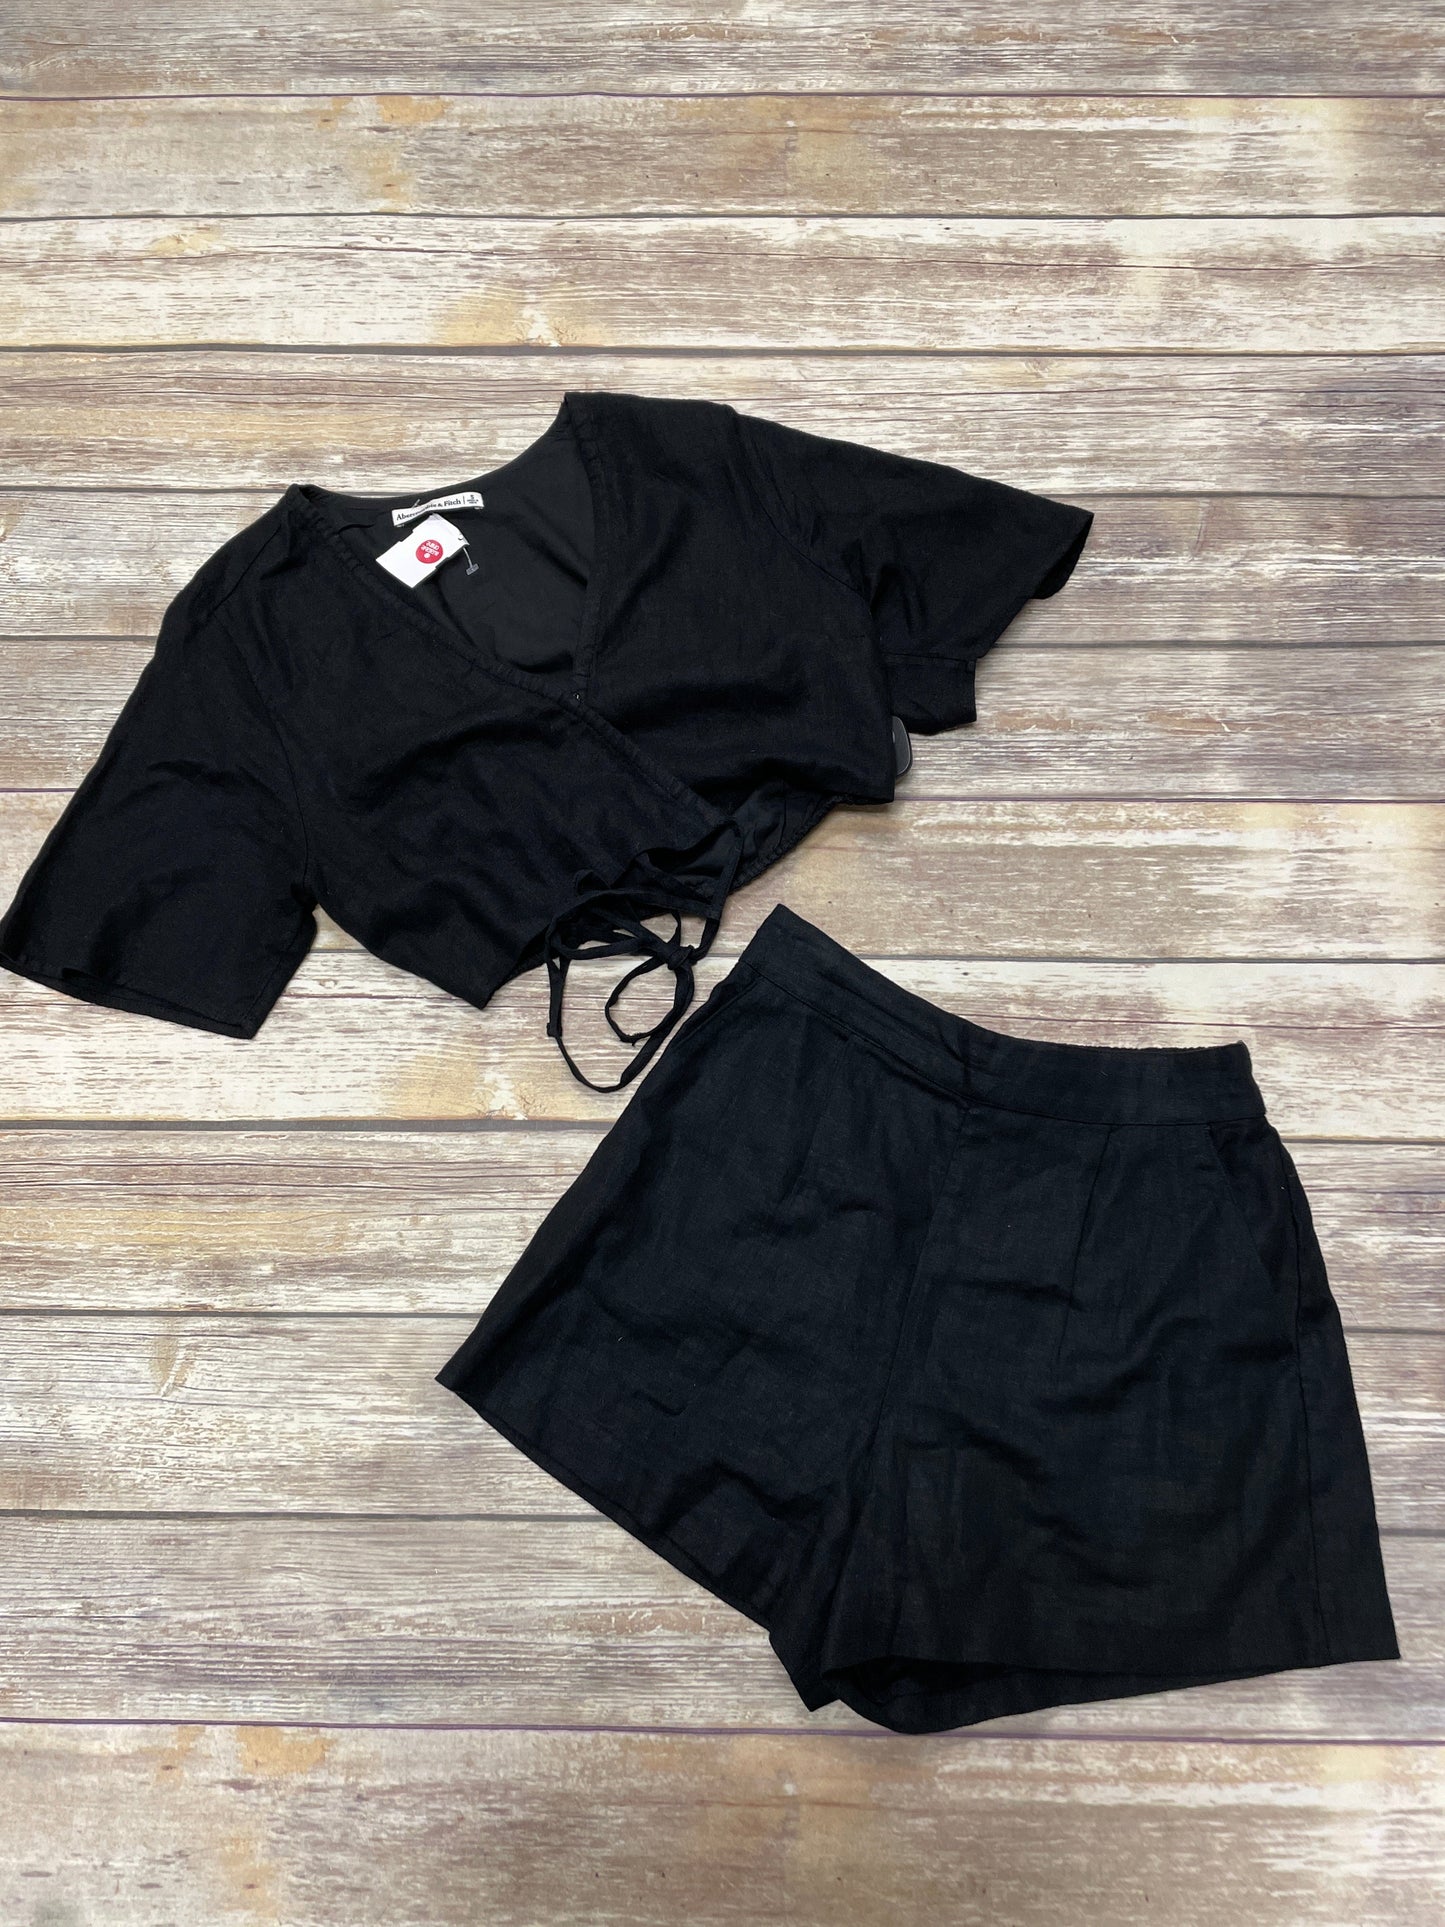 Black Shorts Set Abercrombie And Fitch, Size S